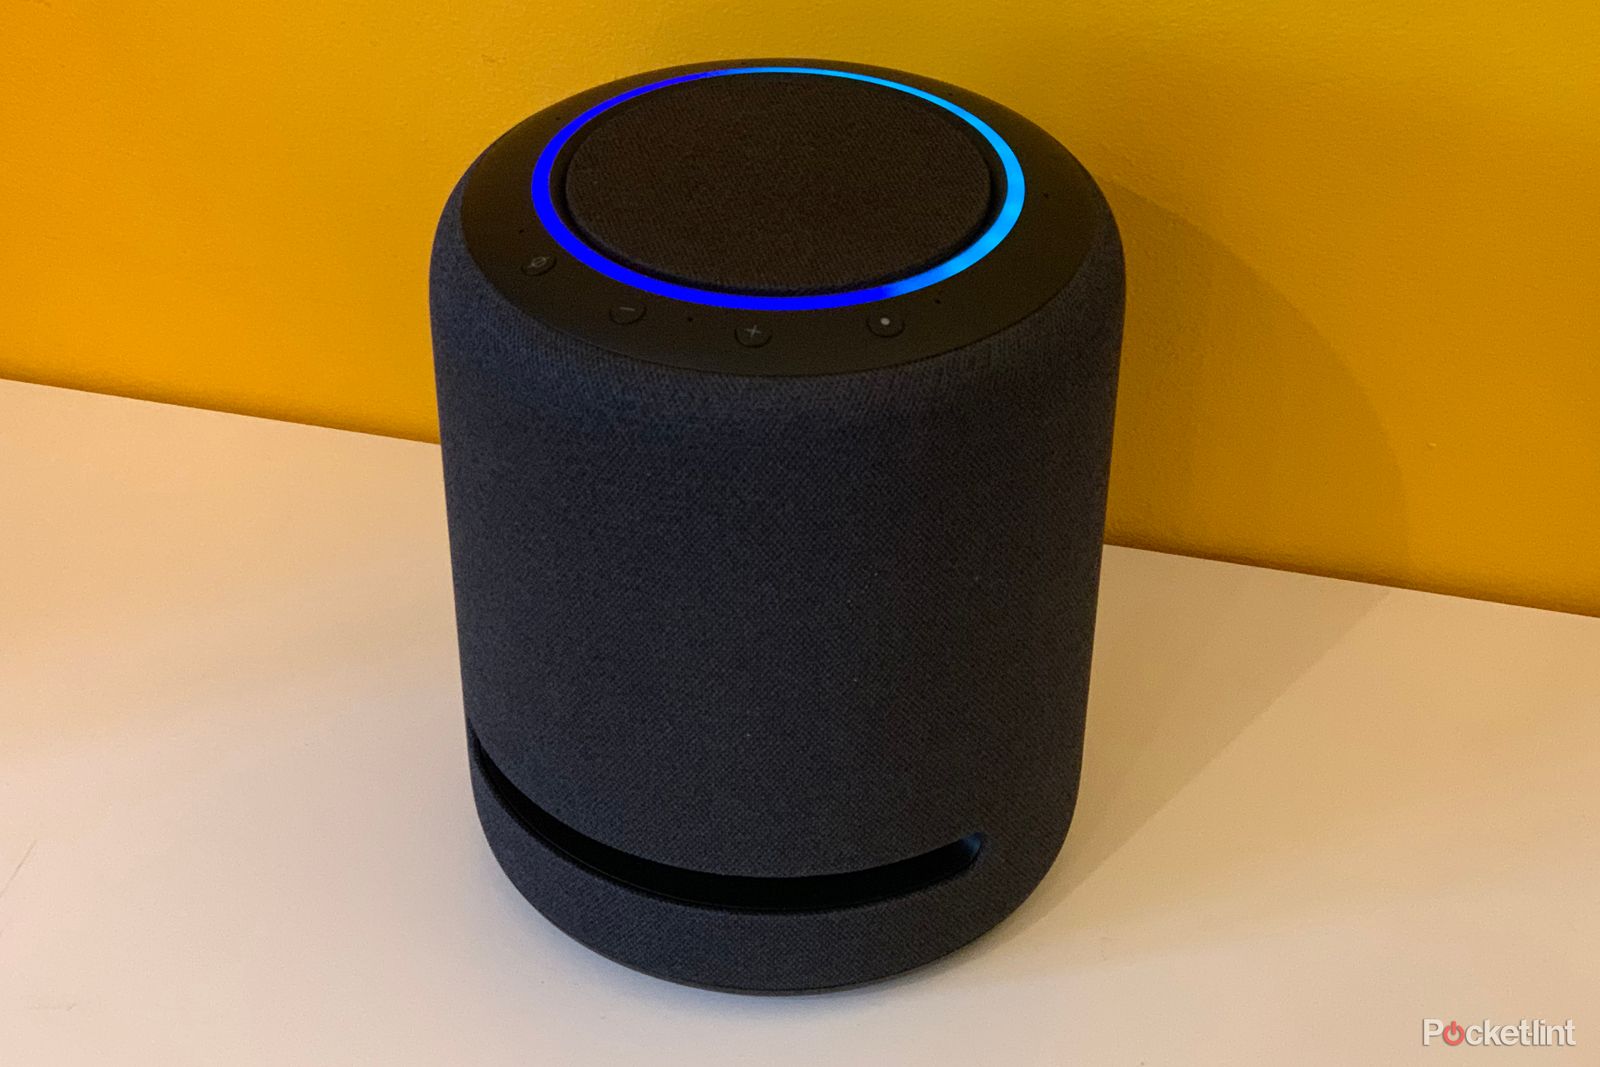 Amazon will launch new Echo devices on 24 September photo 1